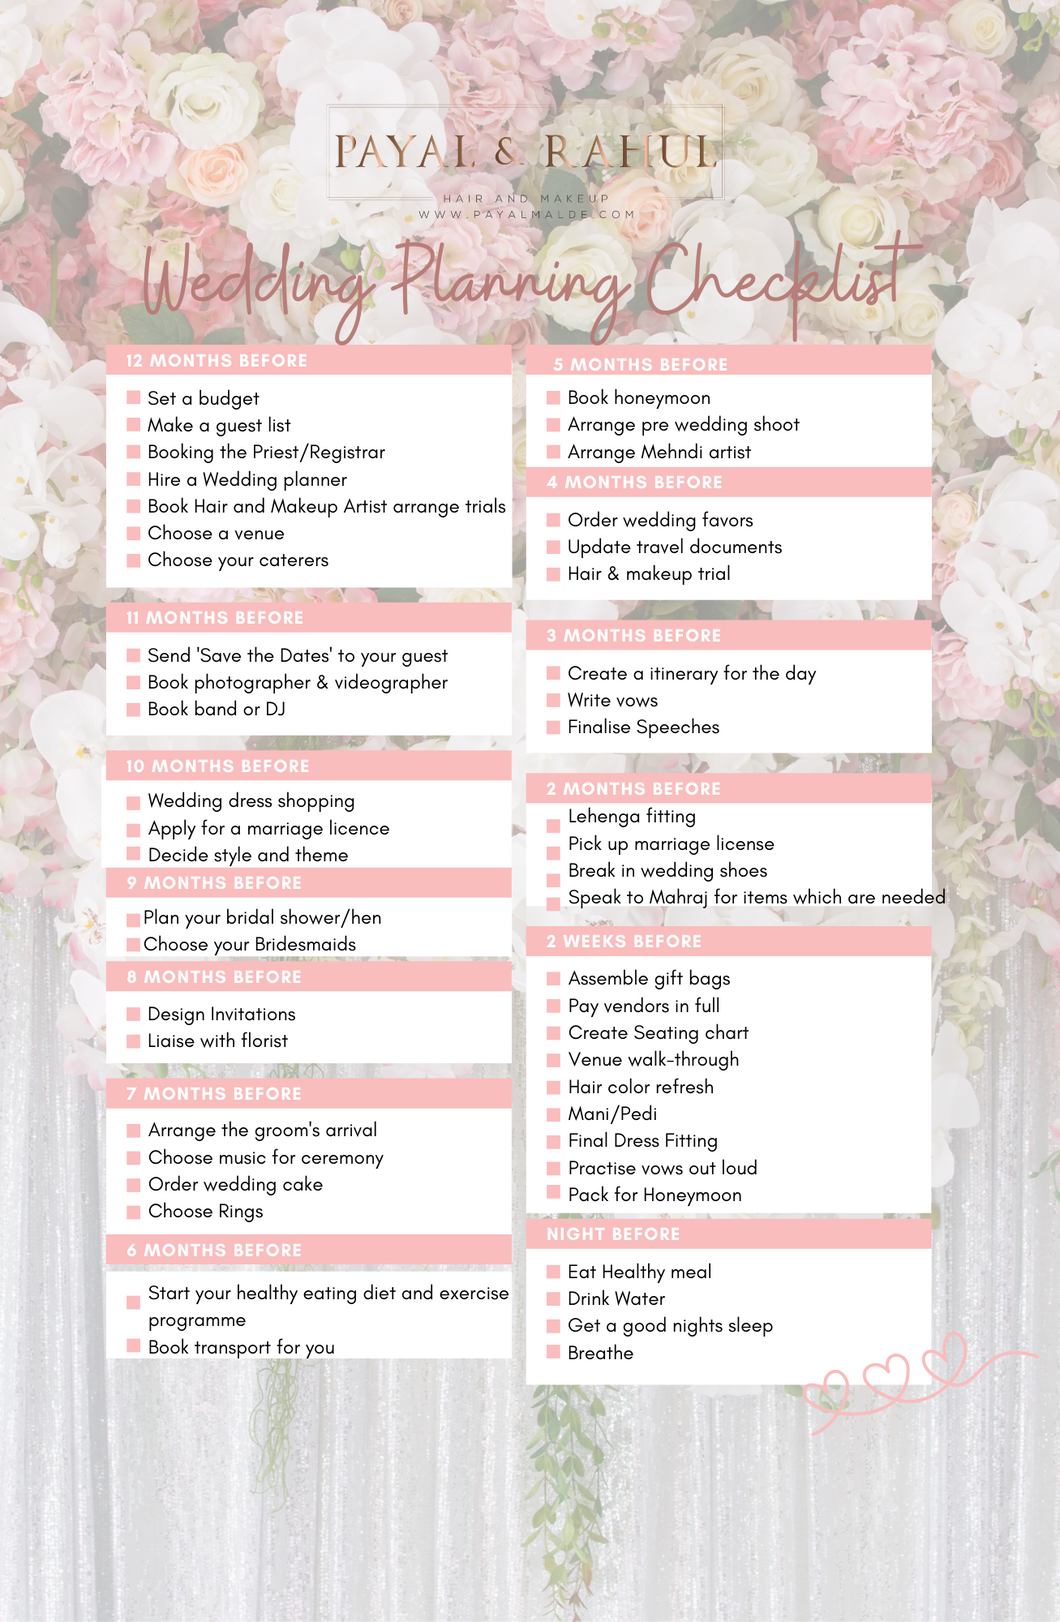 FREE The Indian Wedding Planning Checklist - Printed and Posted